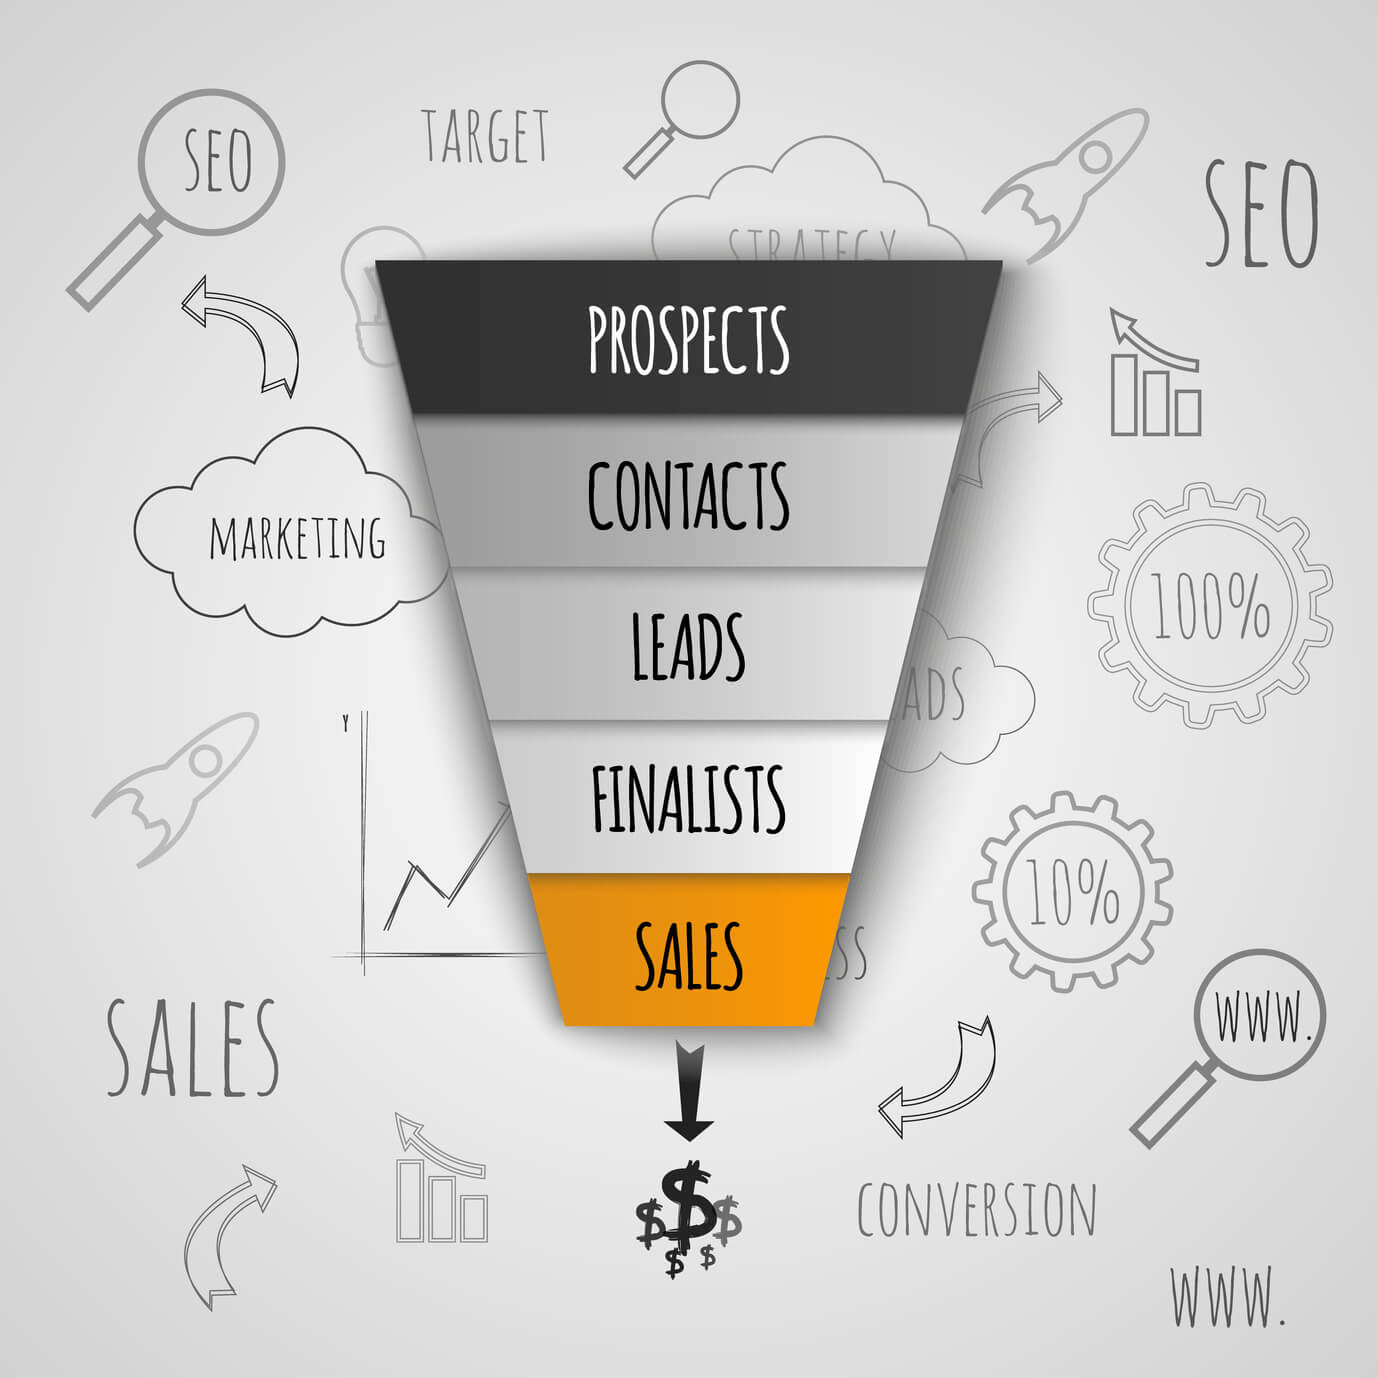 Sales funnel and conversion funnels: How to create them